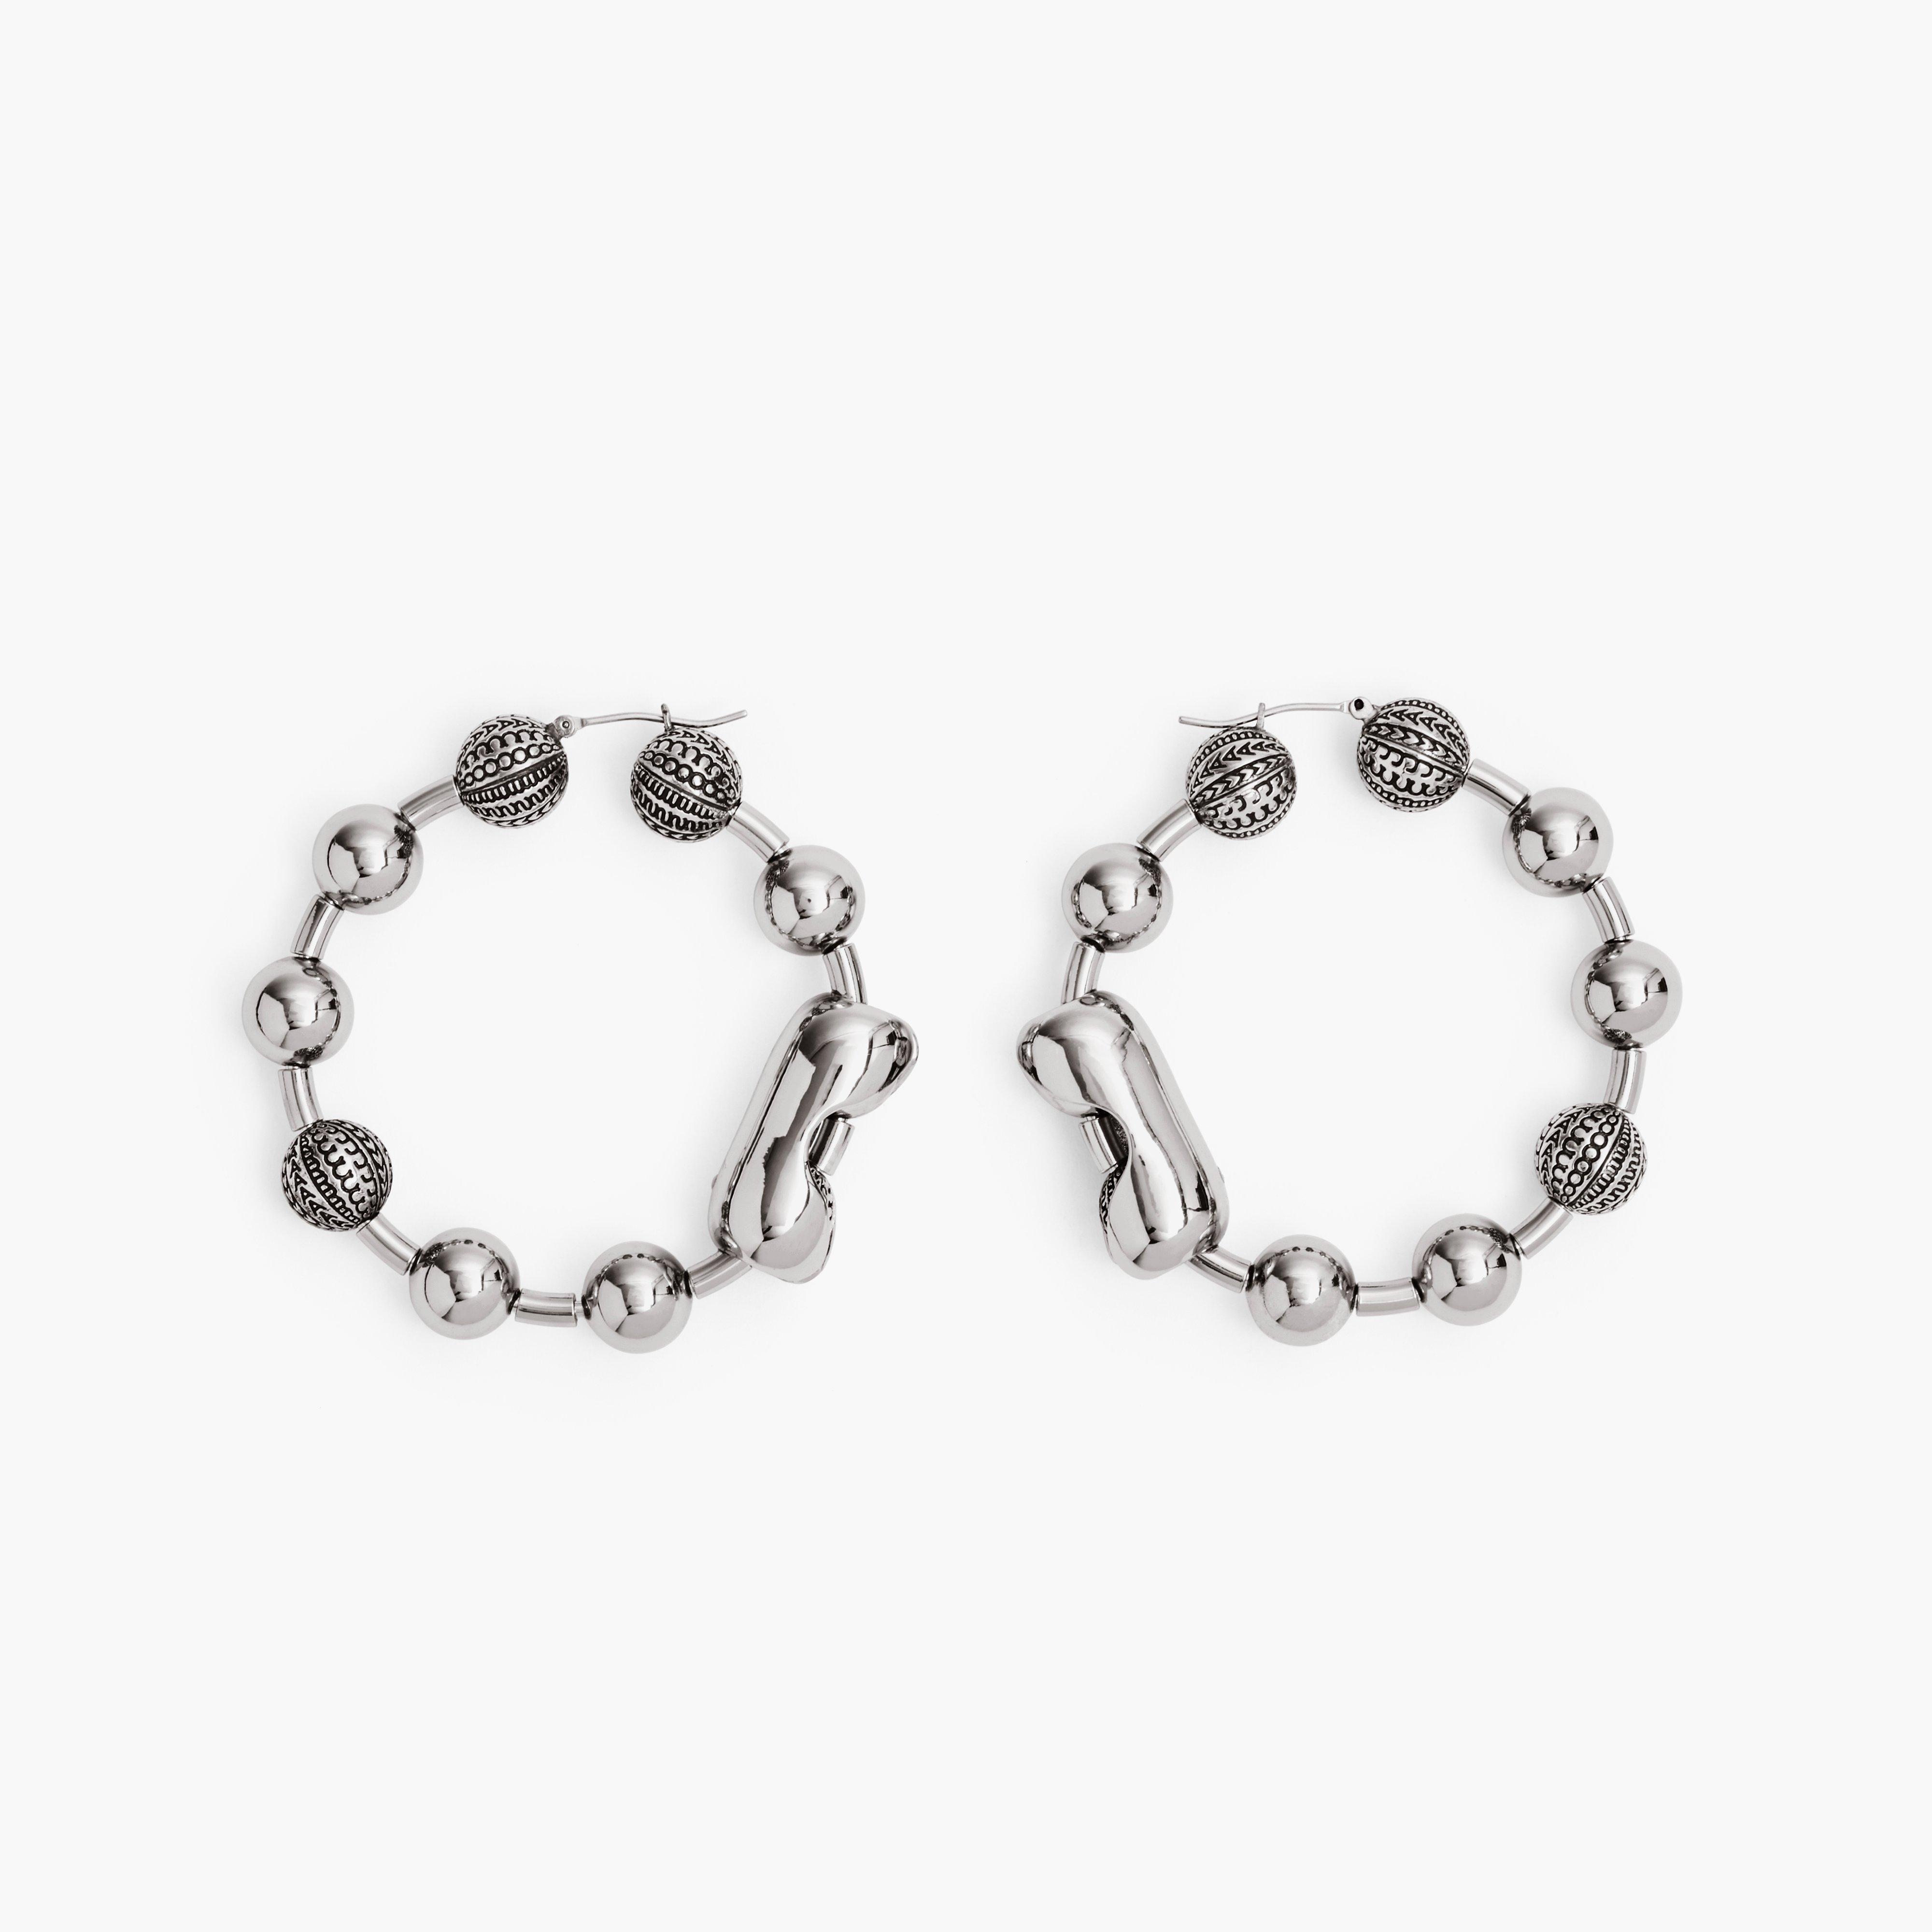 Marc by Marc jacobs The Monogram Ball Chain Hoop,LIGHT ANTIQUE SILVER